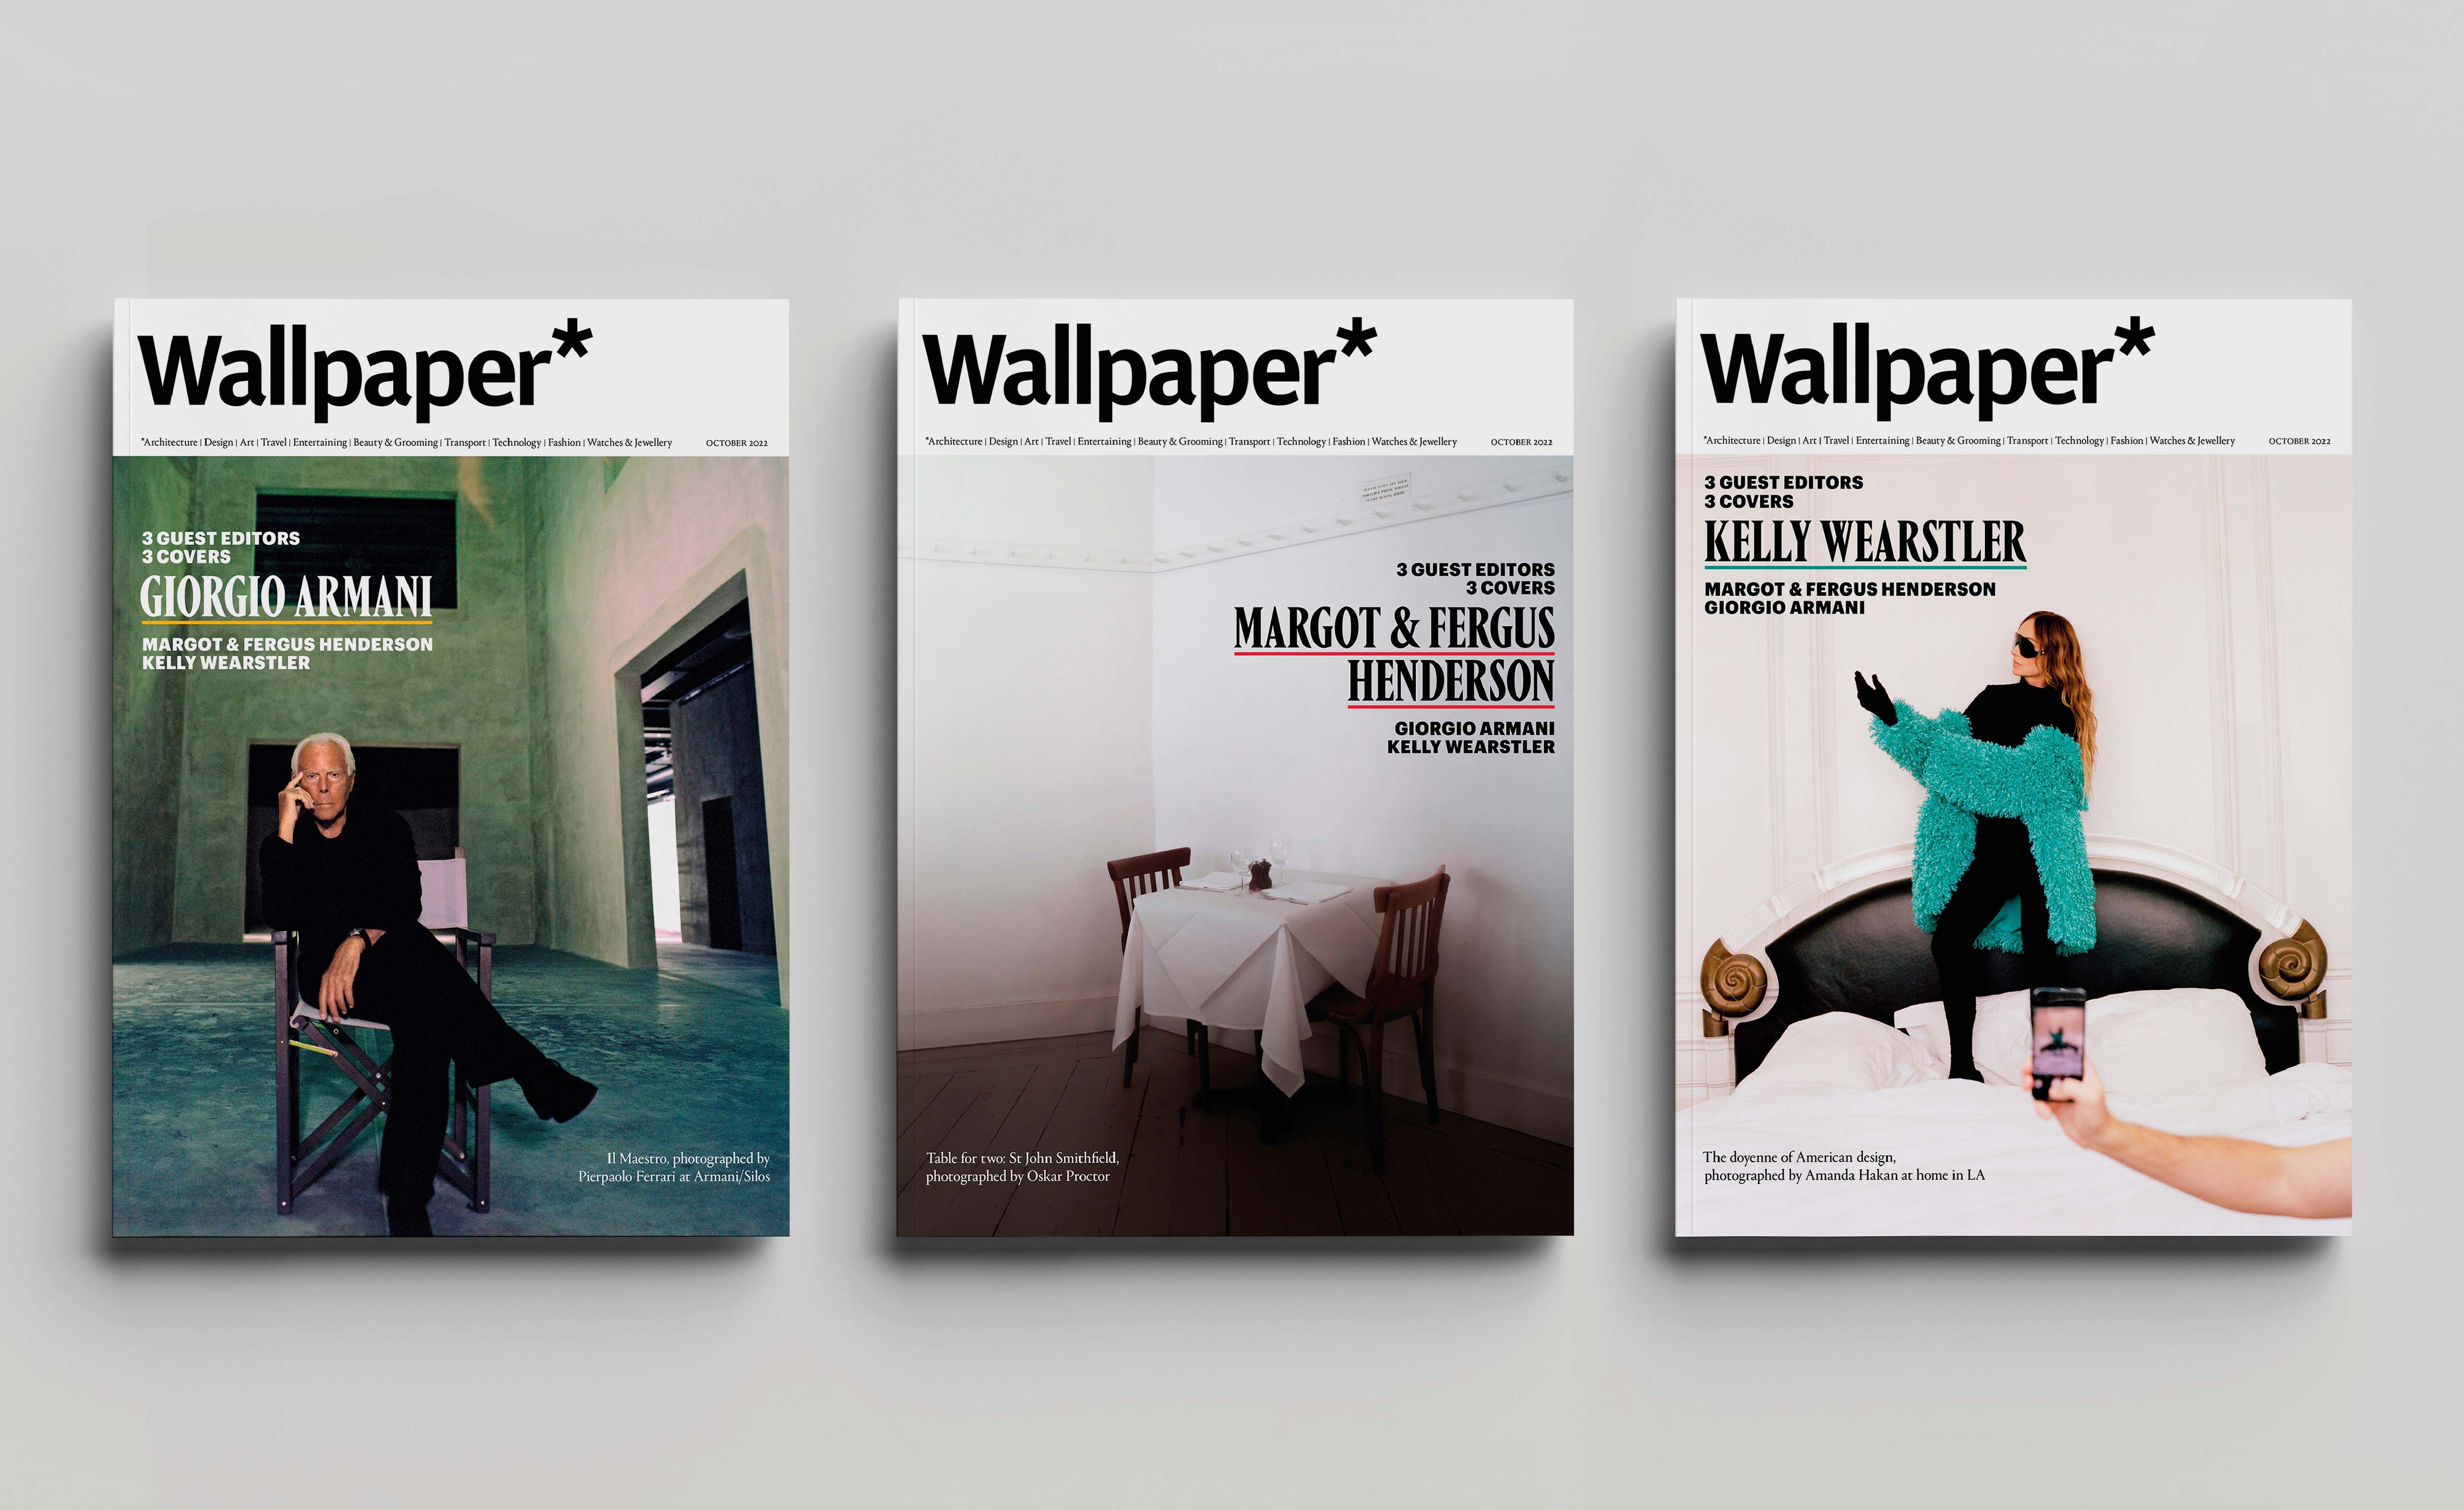 Three guest editors take over Wallpaper October 2022 issue